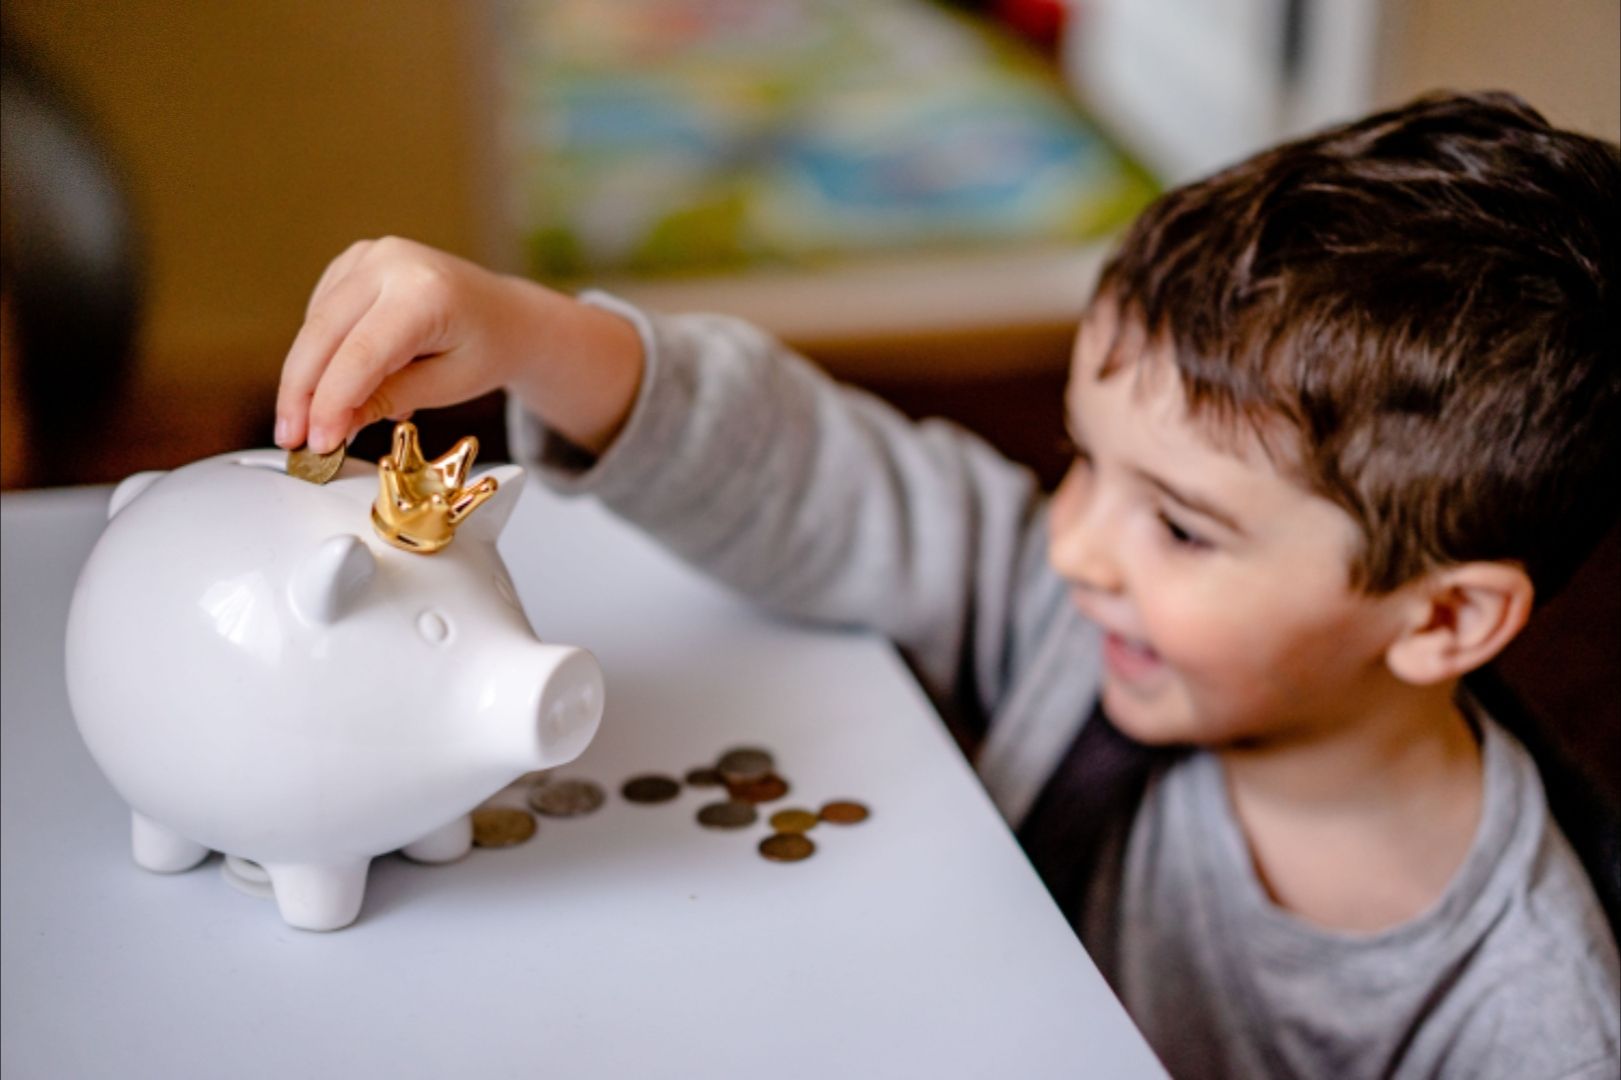 Photo by Oleksandr Pidvalnyi: https://www.pexels.com/photo/boy-in-gray-long-sleeve-shirt-putting-coins-in-a-piggy-bank-12955547/